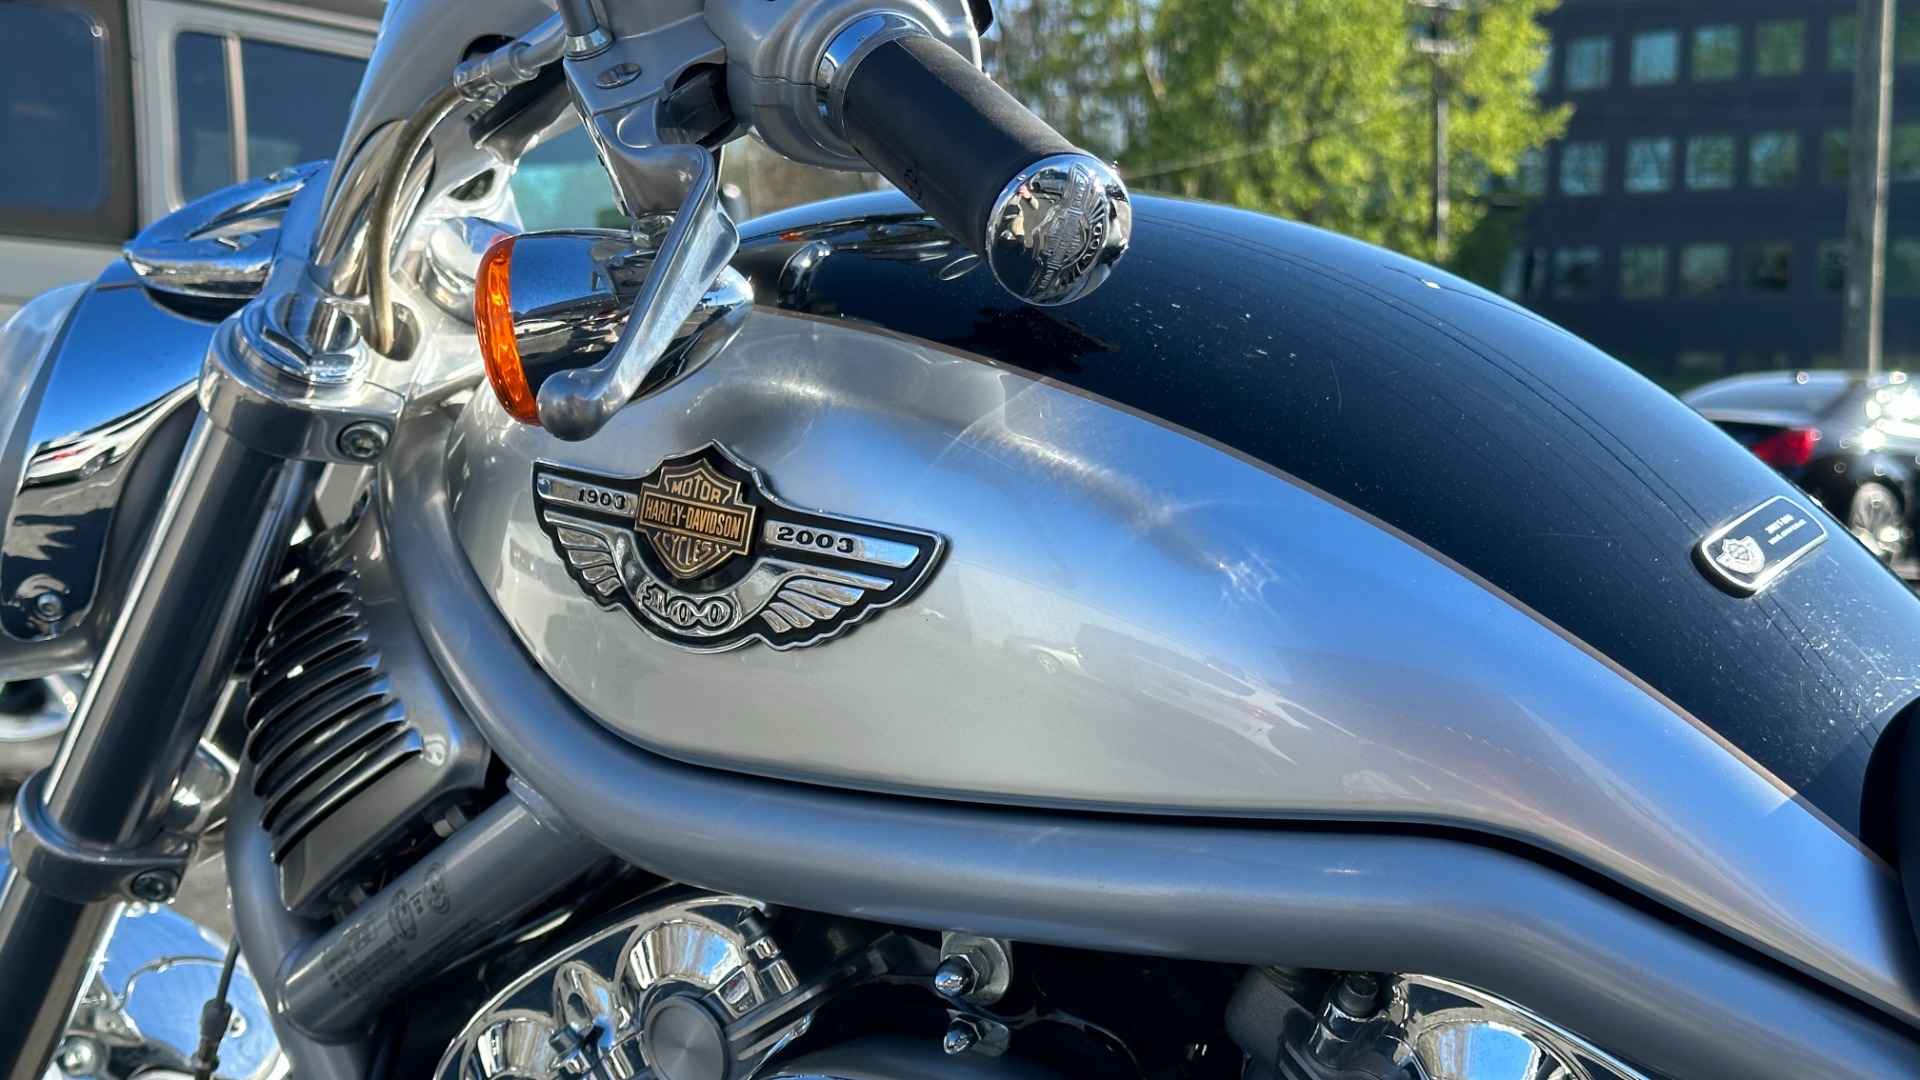 Used 2003 Harley Davidson V Rod ANNIVERSARY EDITION / 1130CC ENGINE / BREMBO BRAKES / VORTEX AIR SCOOPS for sale $7,995 at Formula Imports in Charlotte NC 28227 41